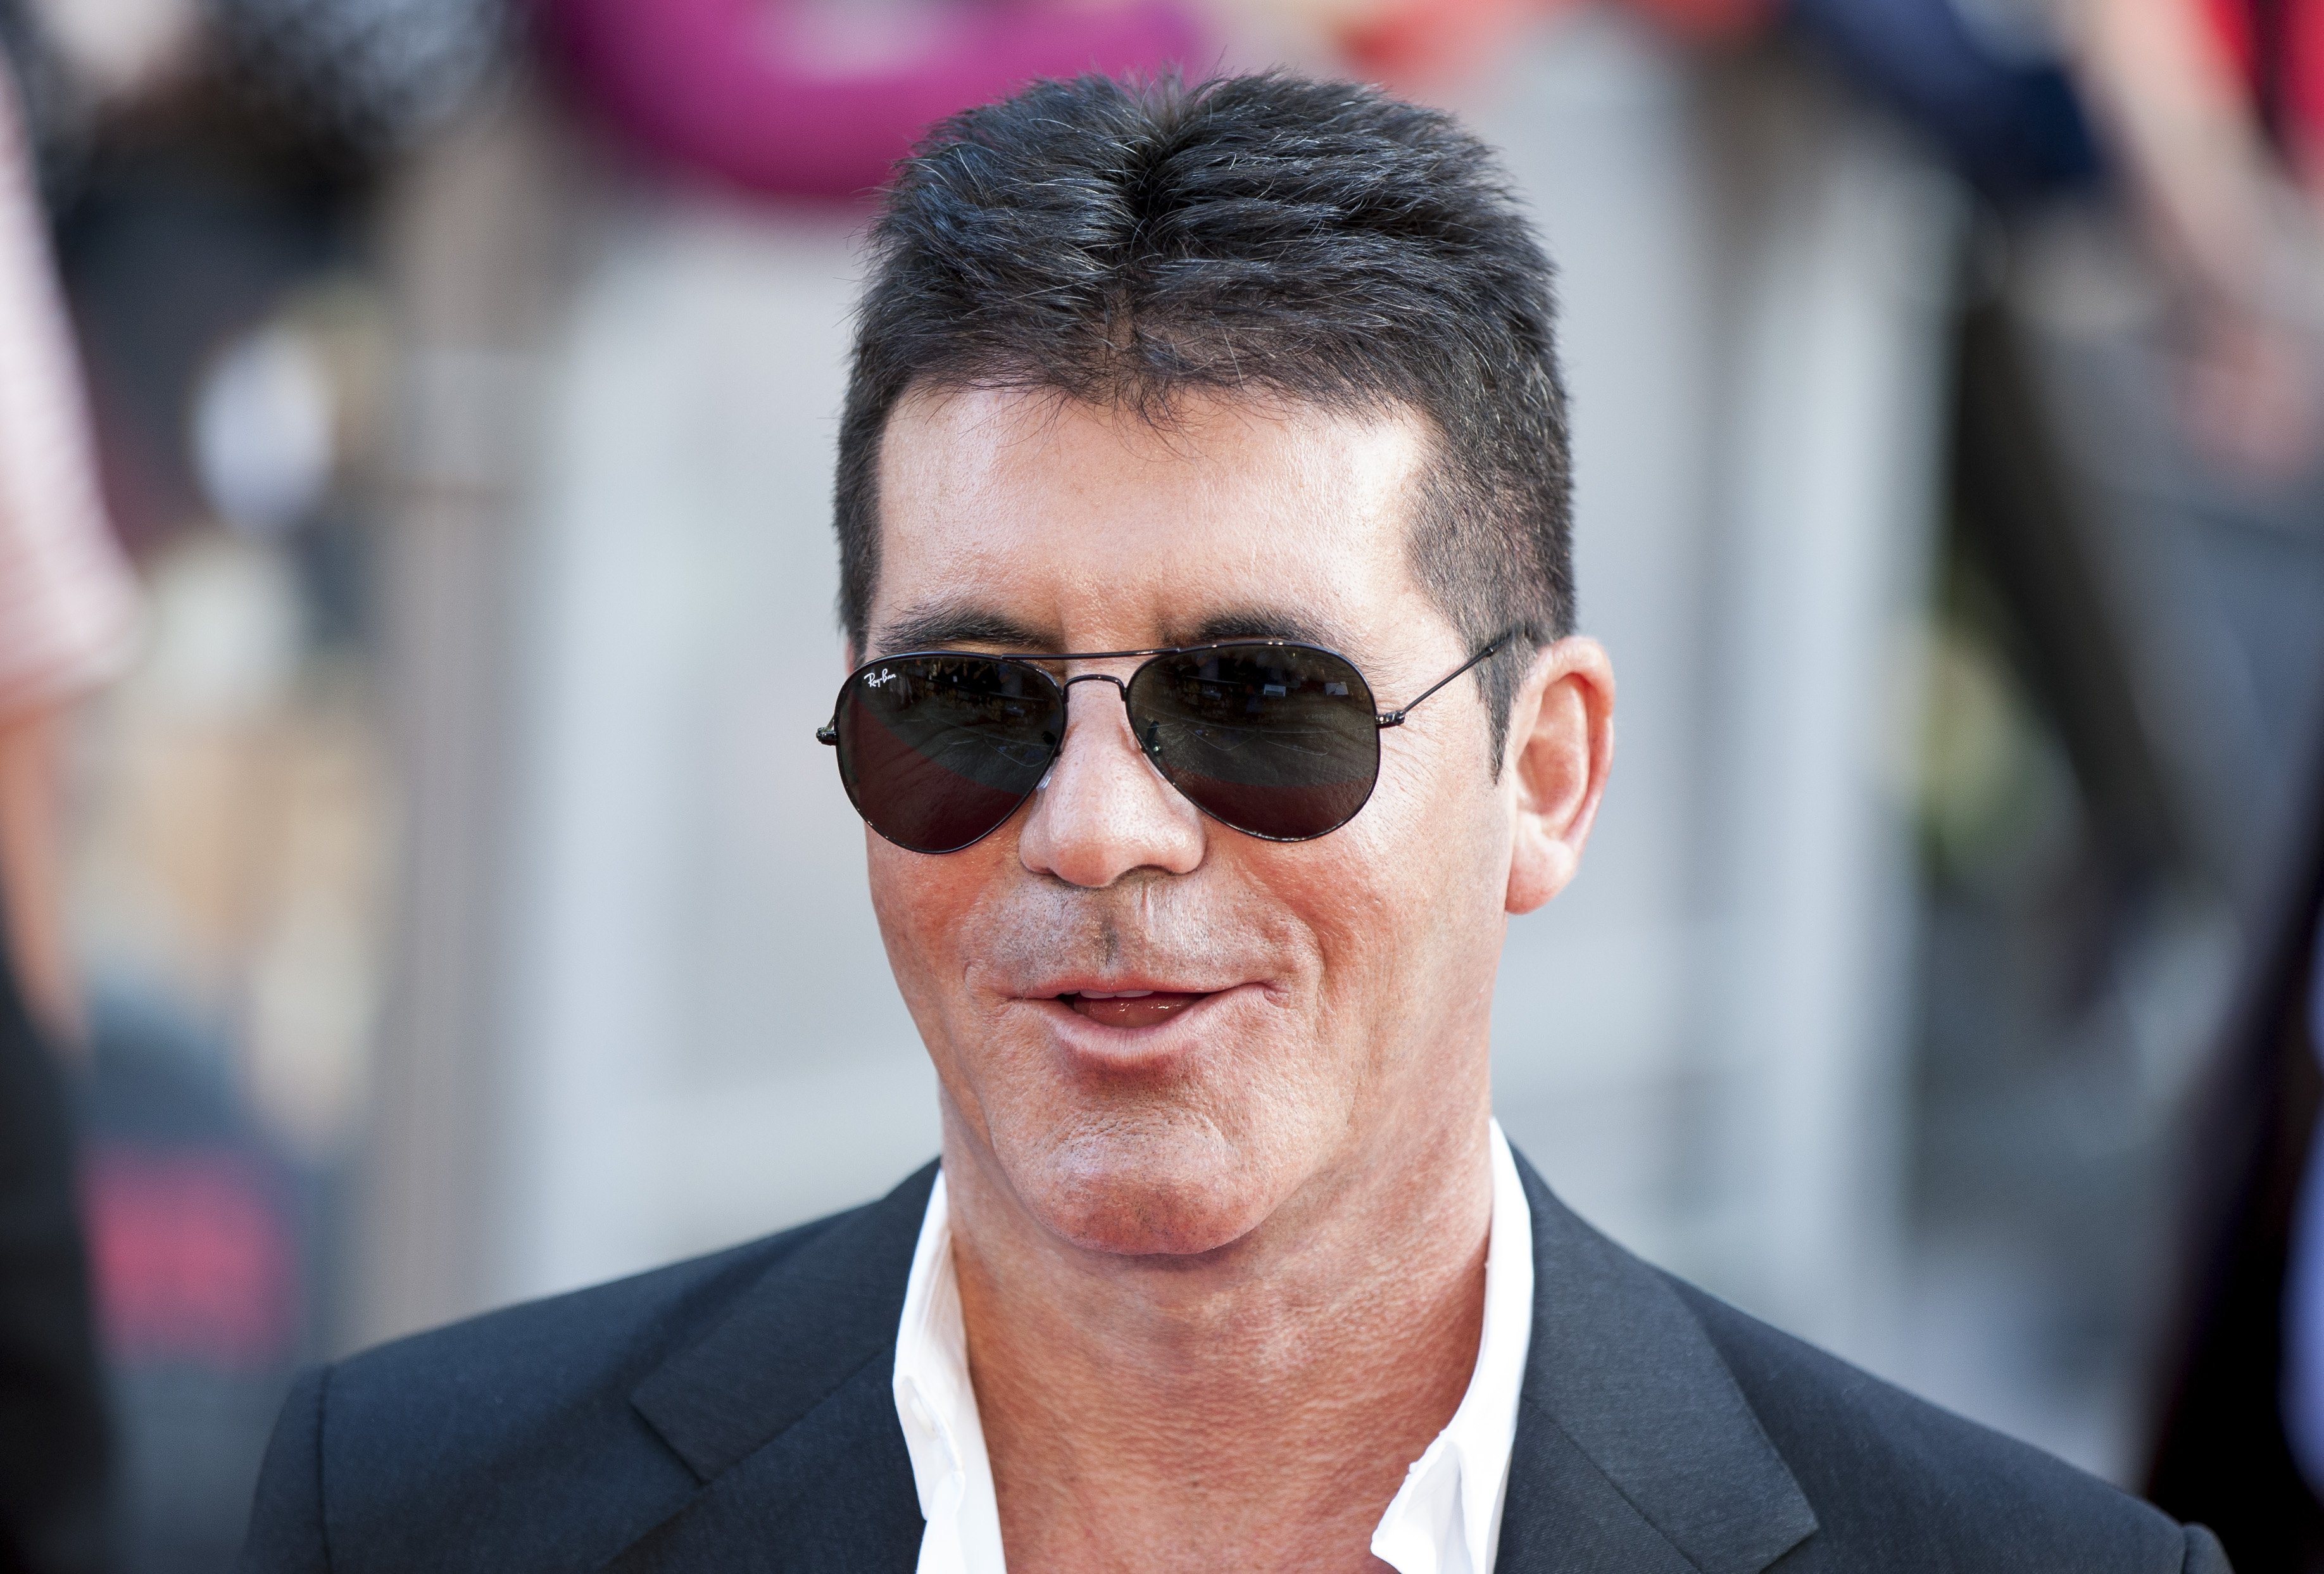 Simon Cowell at the premiere of "One Direction: This Is Us" in London, England on August 20, 2013 | Photo: Getty Images